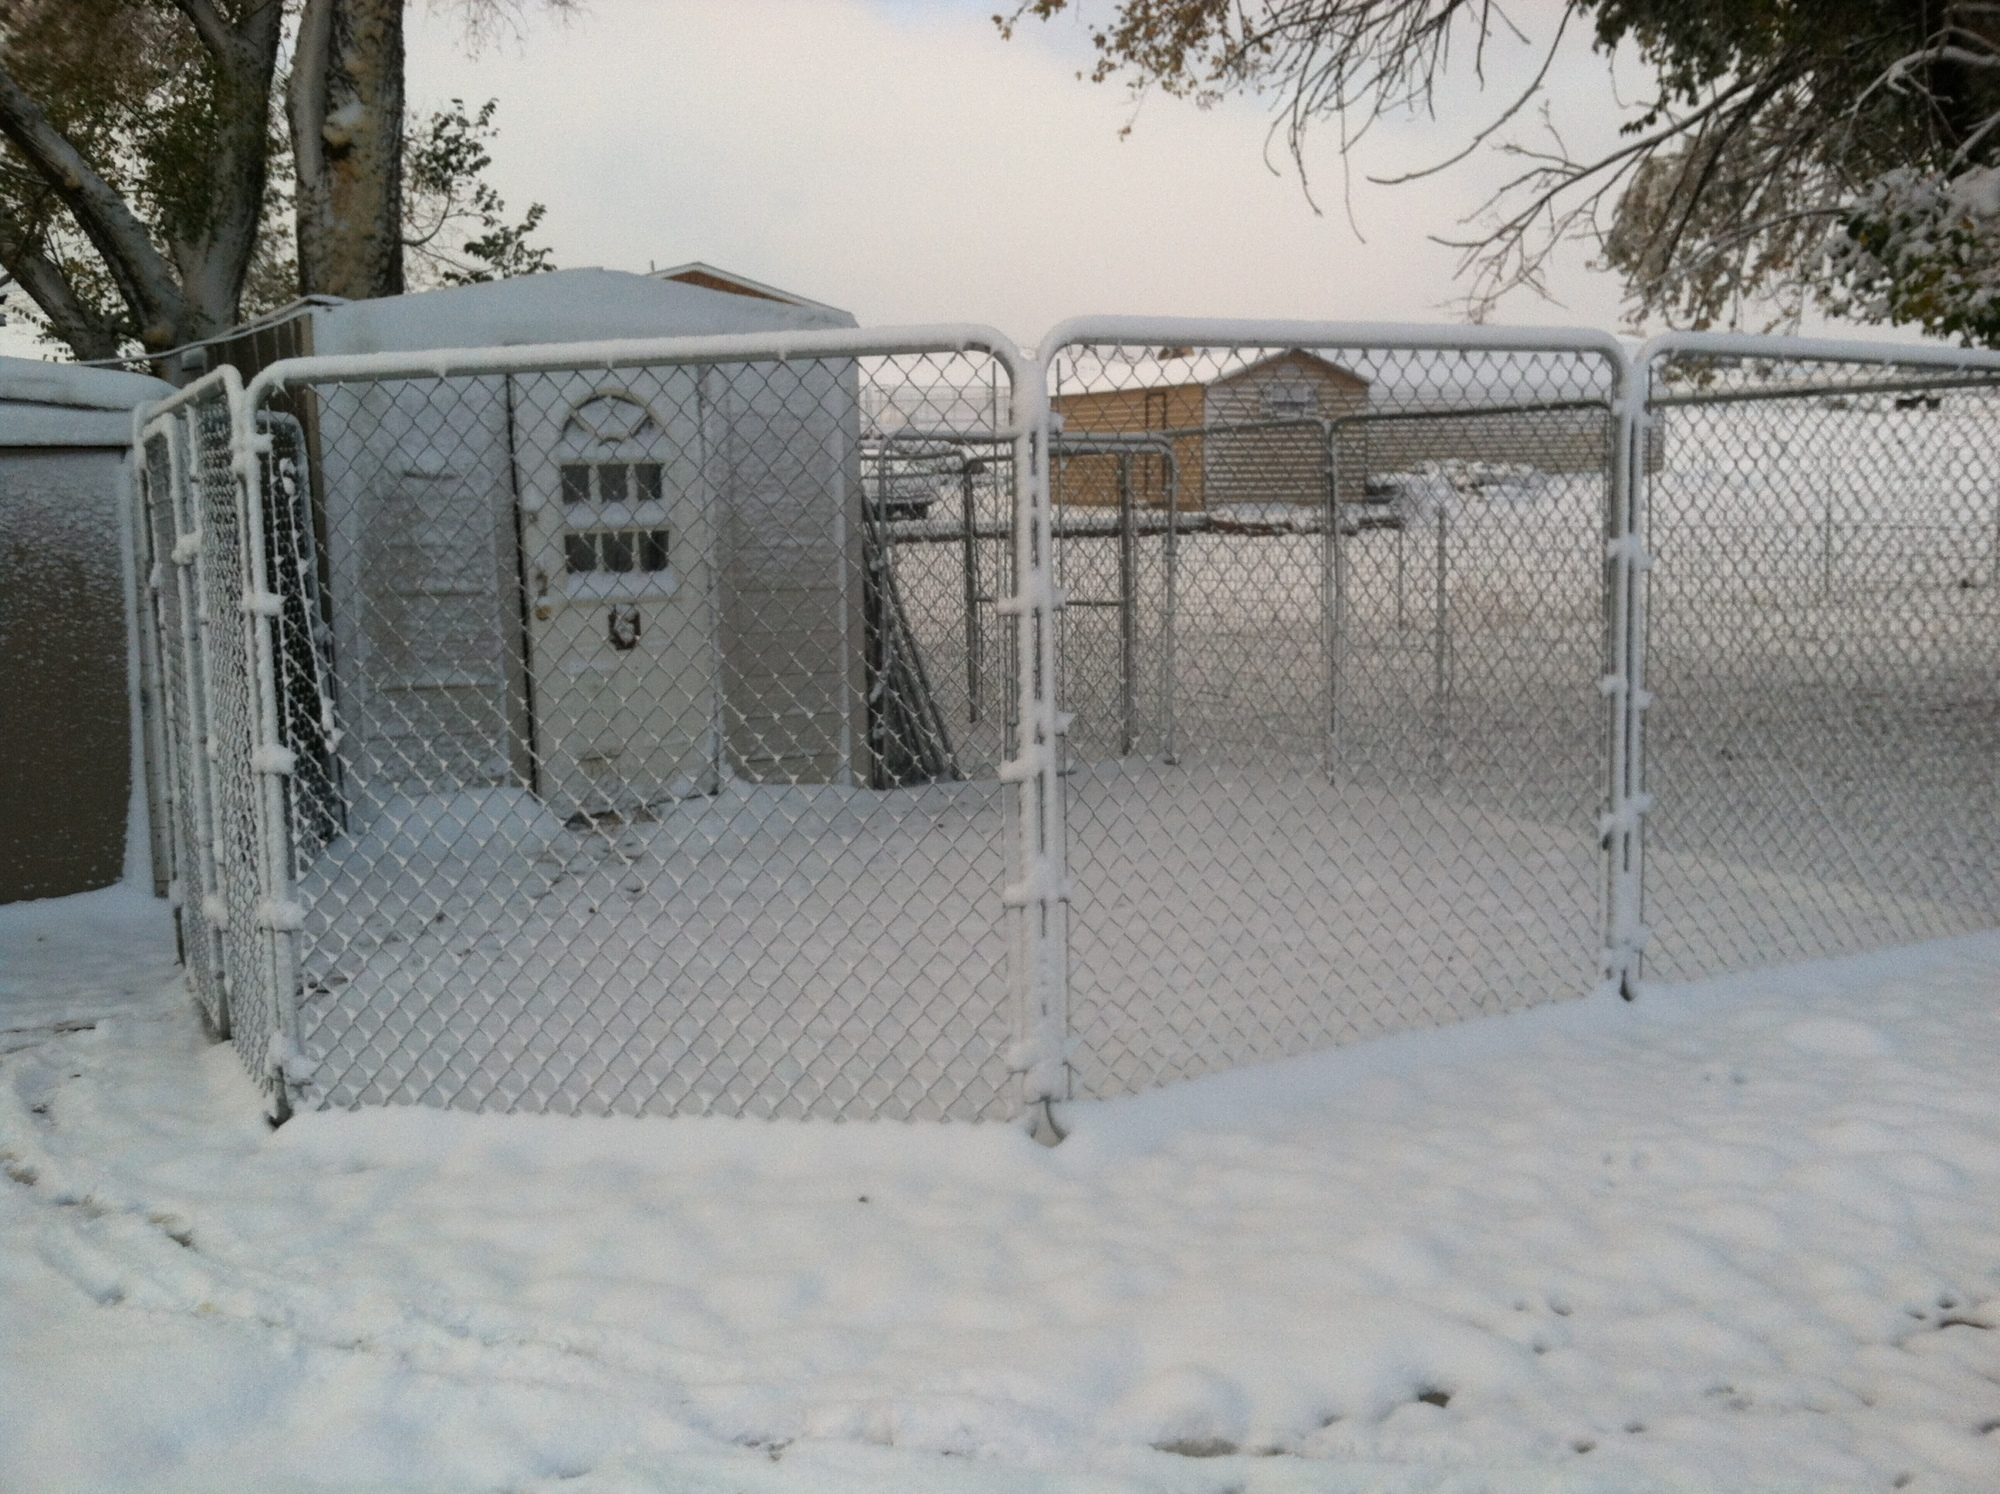 This is our hen house in the snow. 

Our coop is 8ftx8ft. It was converted from an old tool shed into this glorious chicken coop. To the interior we added 12 nesting boxes, electrical heat lamp and multiple roosts. On the exterior, we installed a new door we picked up on craigslist.org for $5. The doggie door we got at home depot and the chickens love it!